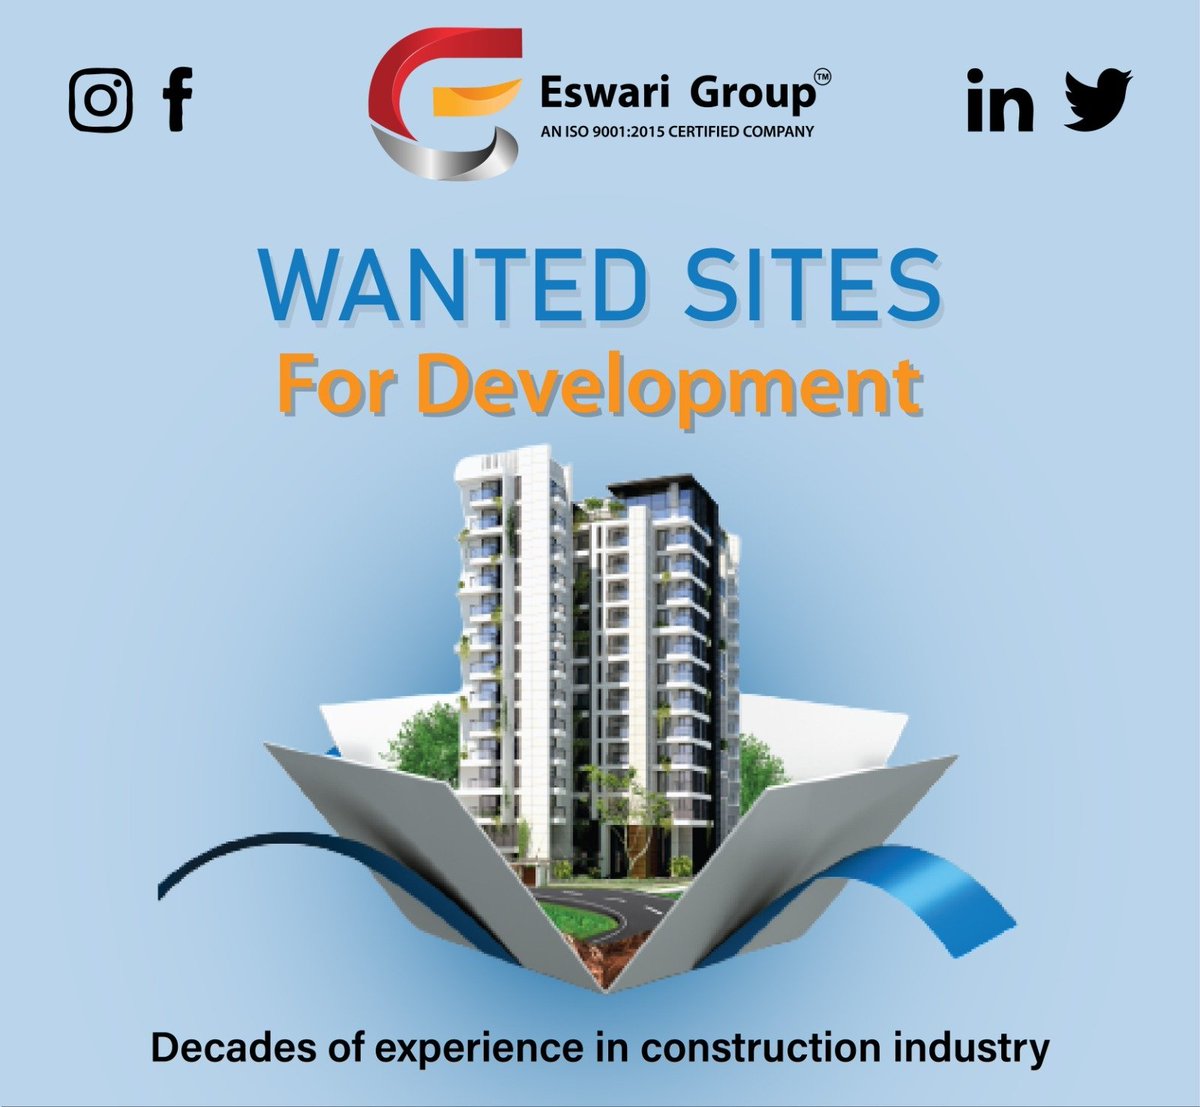 We all love our favourite thing's and favourite thing's at your new feels like heaven 
#EswariGroup 
#eswariconstruction 
#EswariHomes 
#bestcompany 
#eswariinteriors
#visakhapatnamrealestate 
#eswariflats 
#govtjobs 
#teacher 
For more information contact haritha phn:7036952137